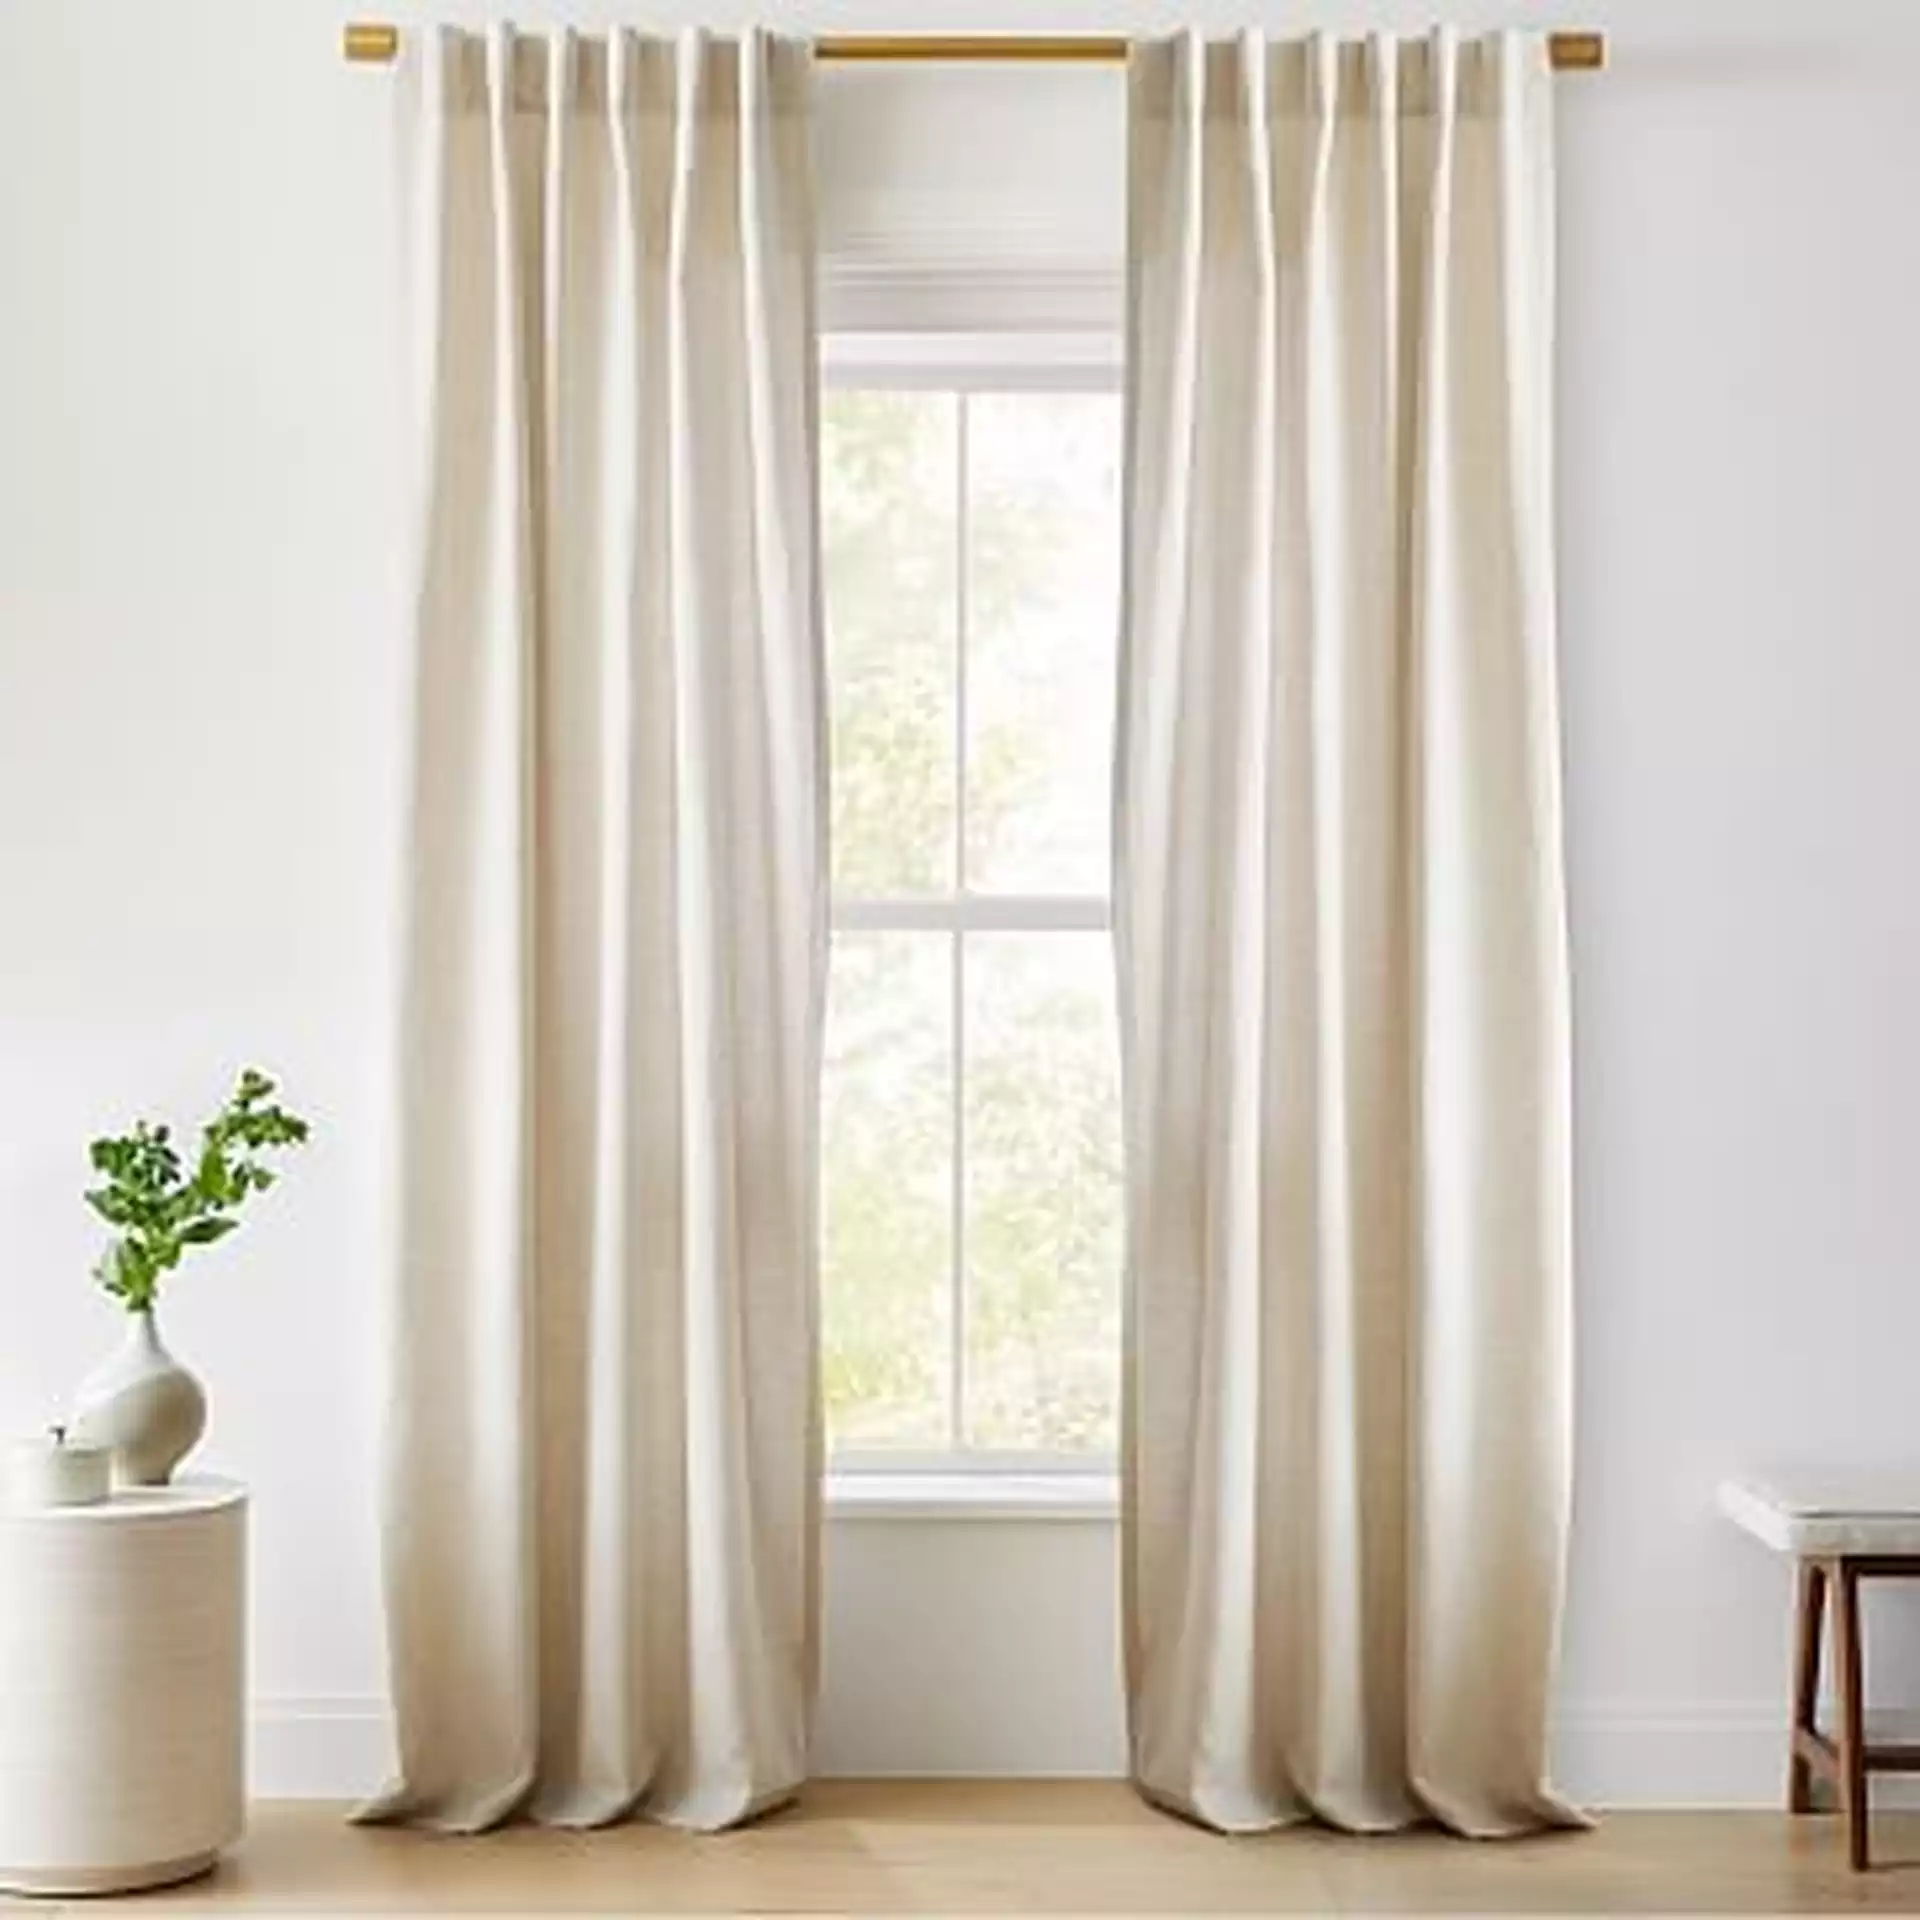 European Flax Linen Curtain with Cotton Lining, Natural, 48"x84", Set of 2